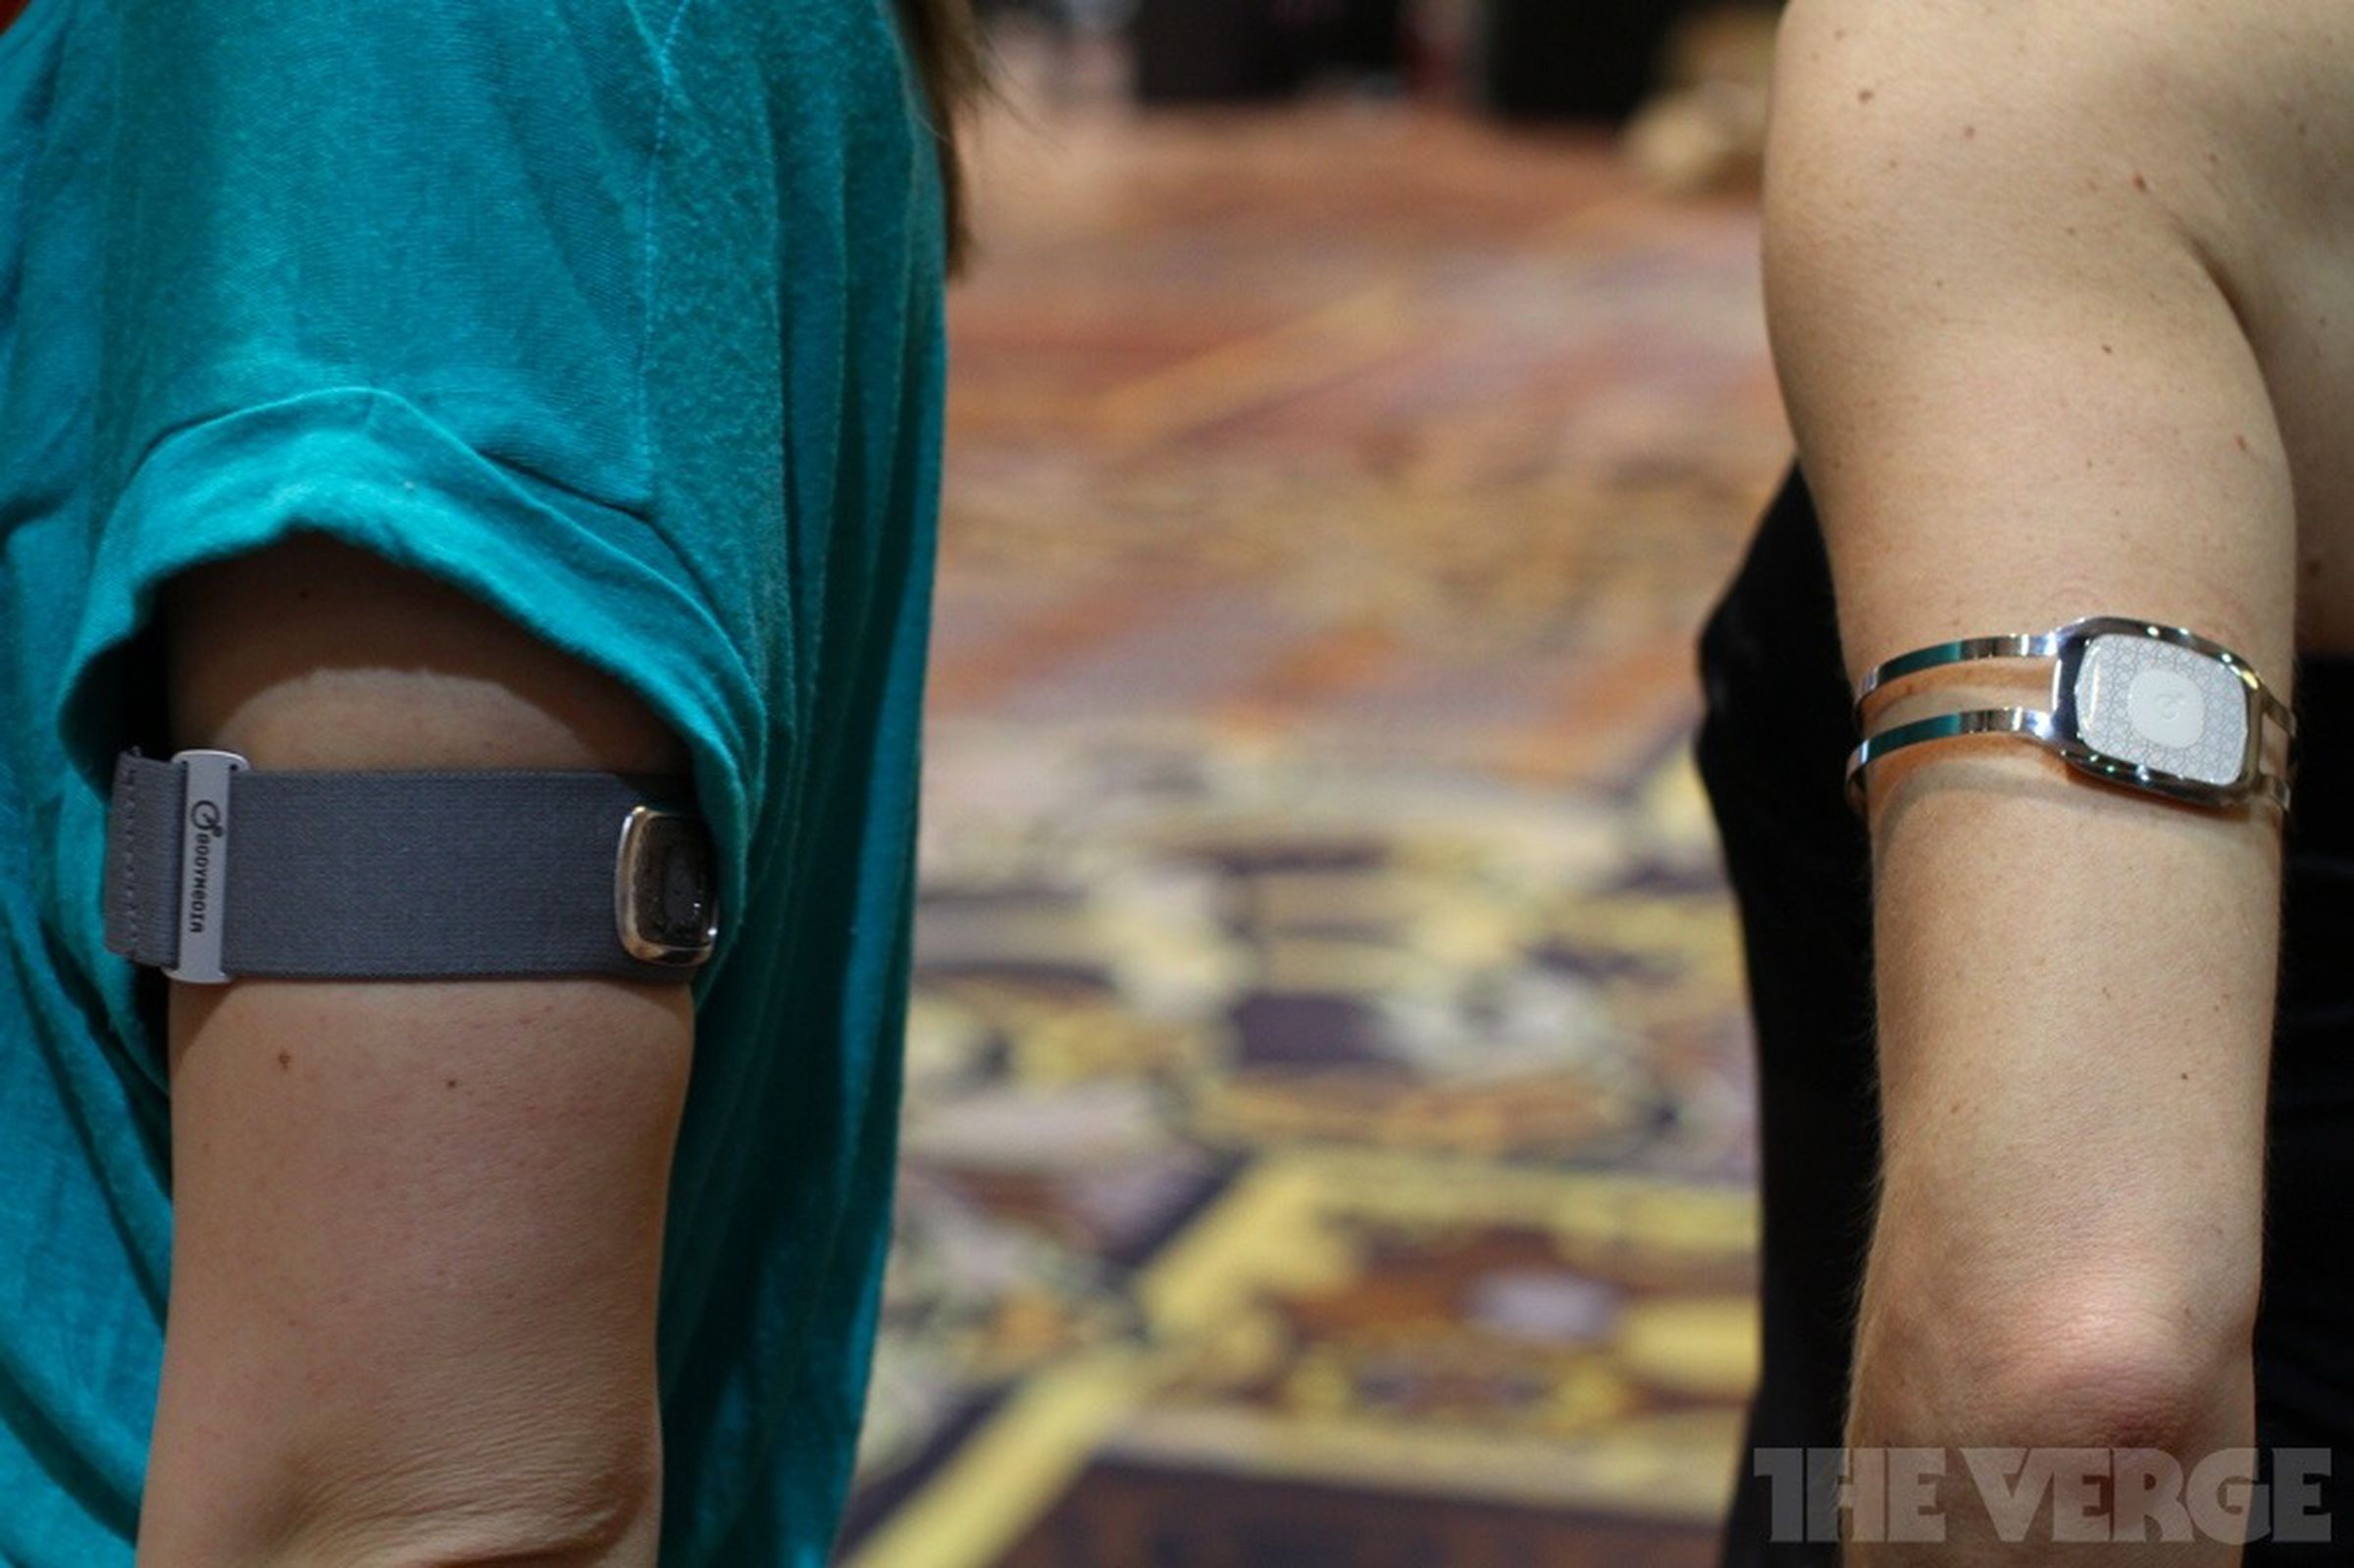 BodyMedia Core 2 personal fitness and health monitor hands-on photos